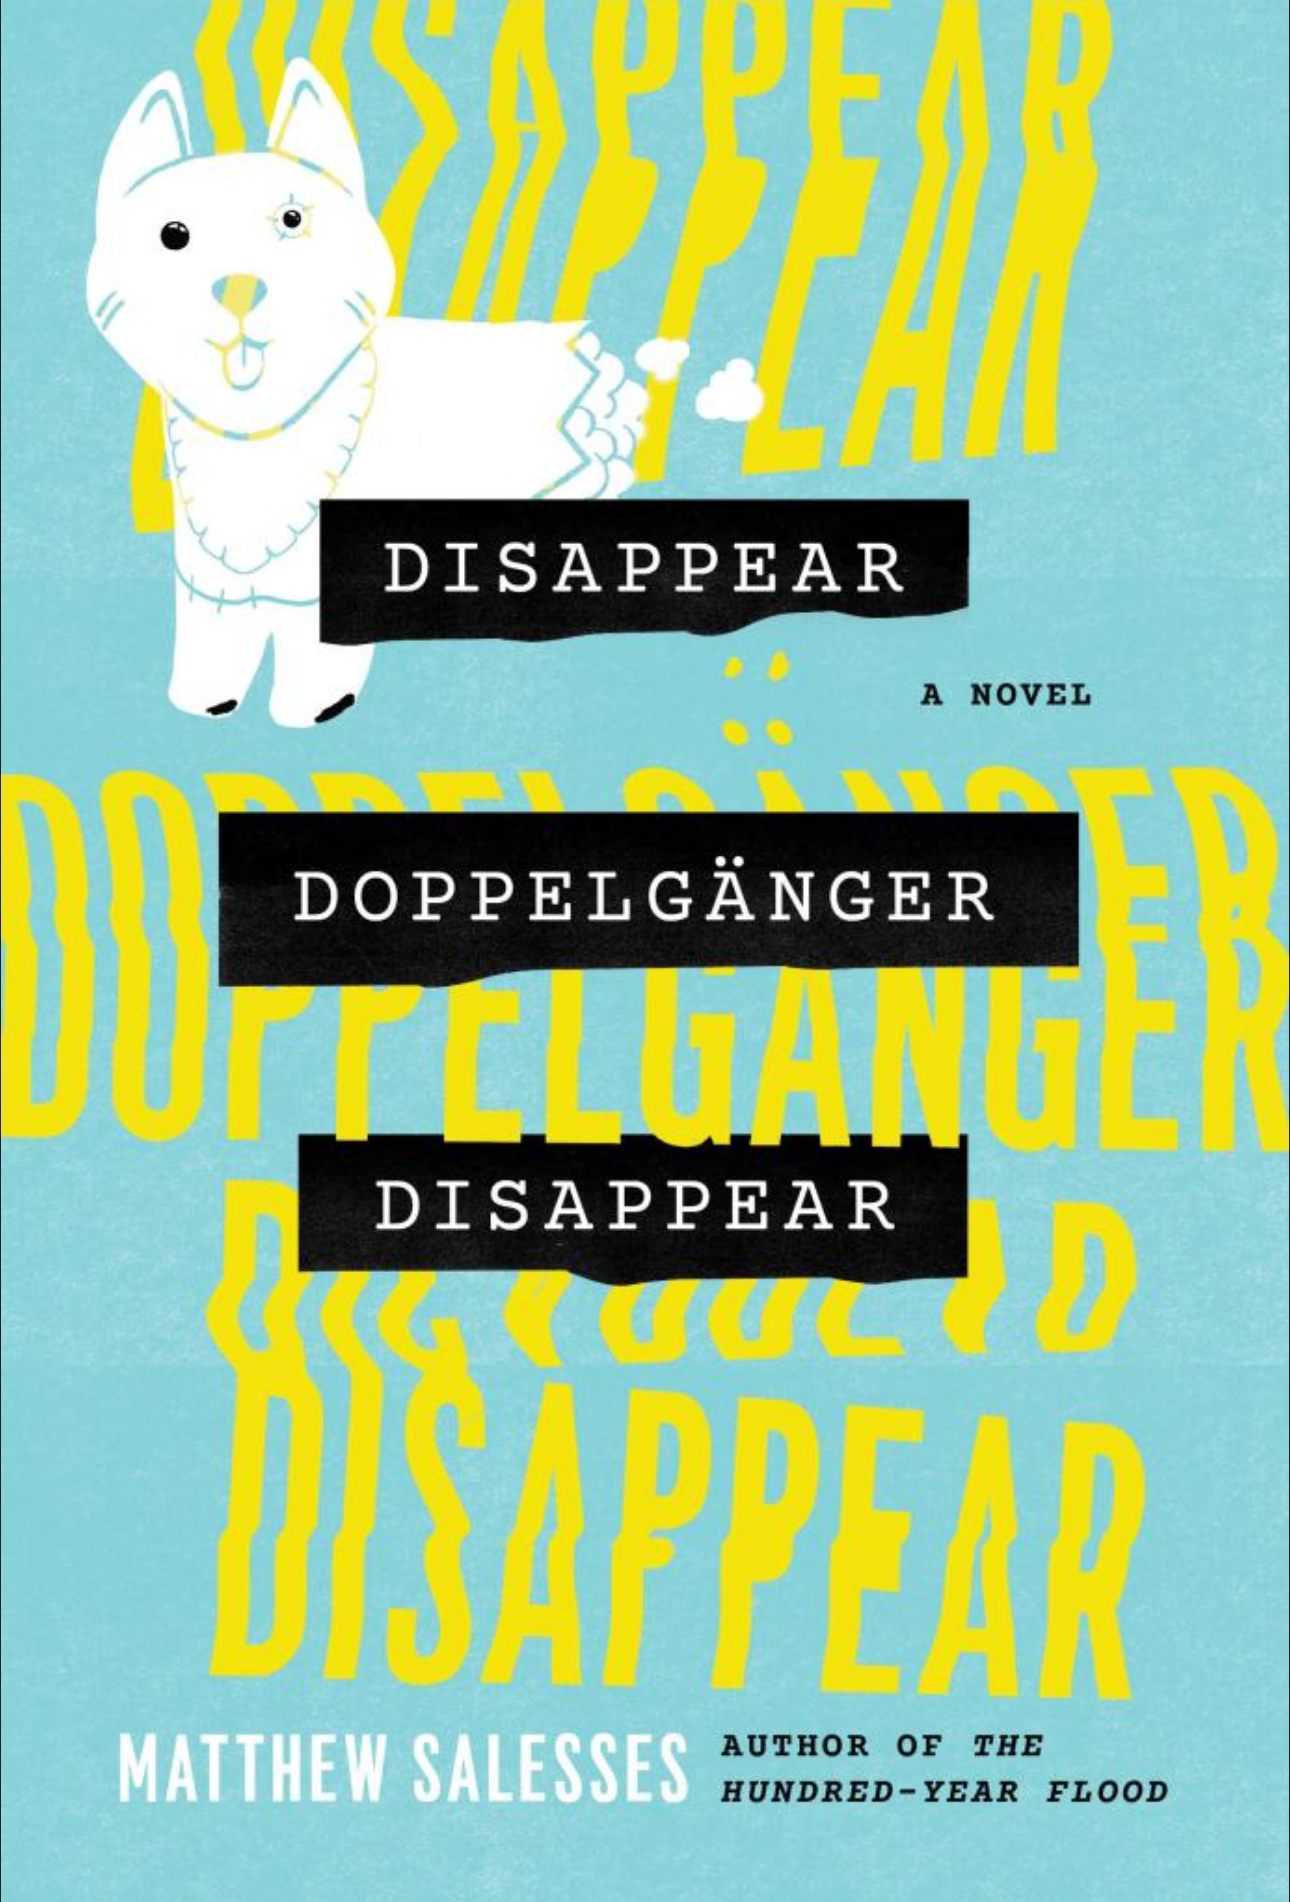 Virtual Book Launch: Disappear Doppelgänger Disappear by Matthew Salesses in conversation with Cathy Park Hong and Hafizah Geter